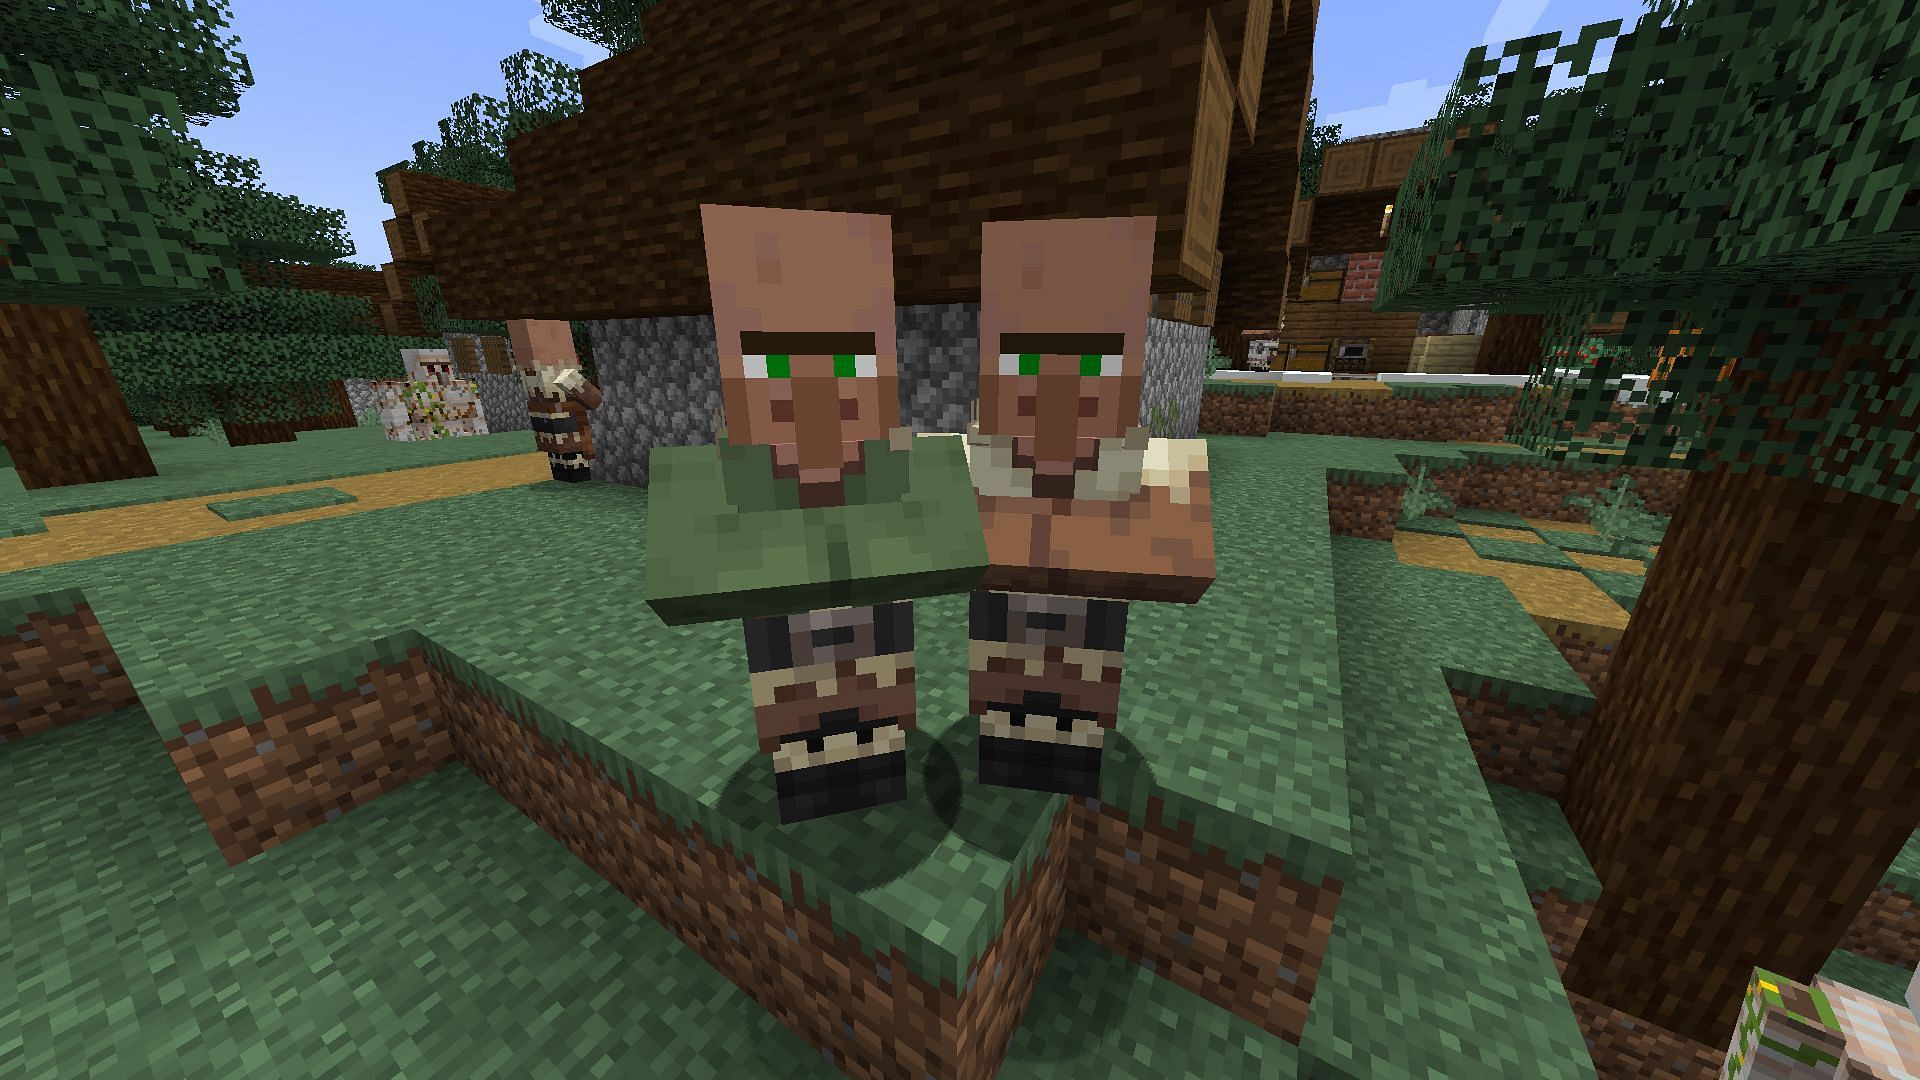 At least three villagers are needed to create an iron golem in Minecraft (Image via Mojang)